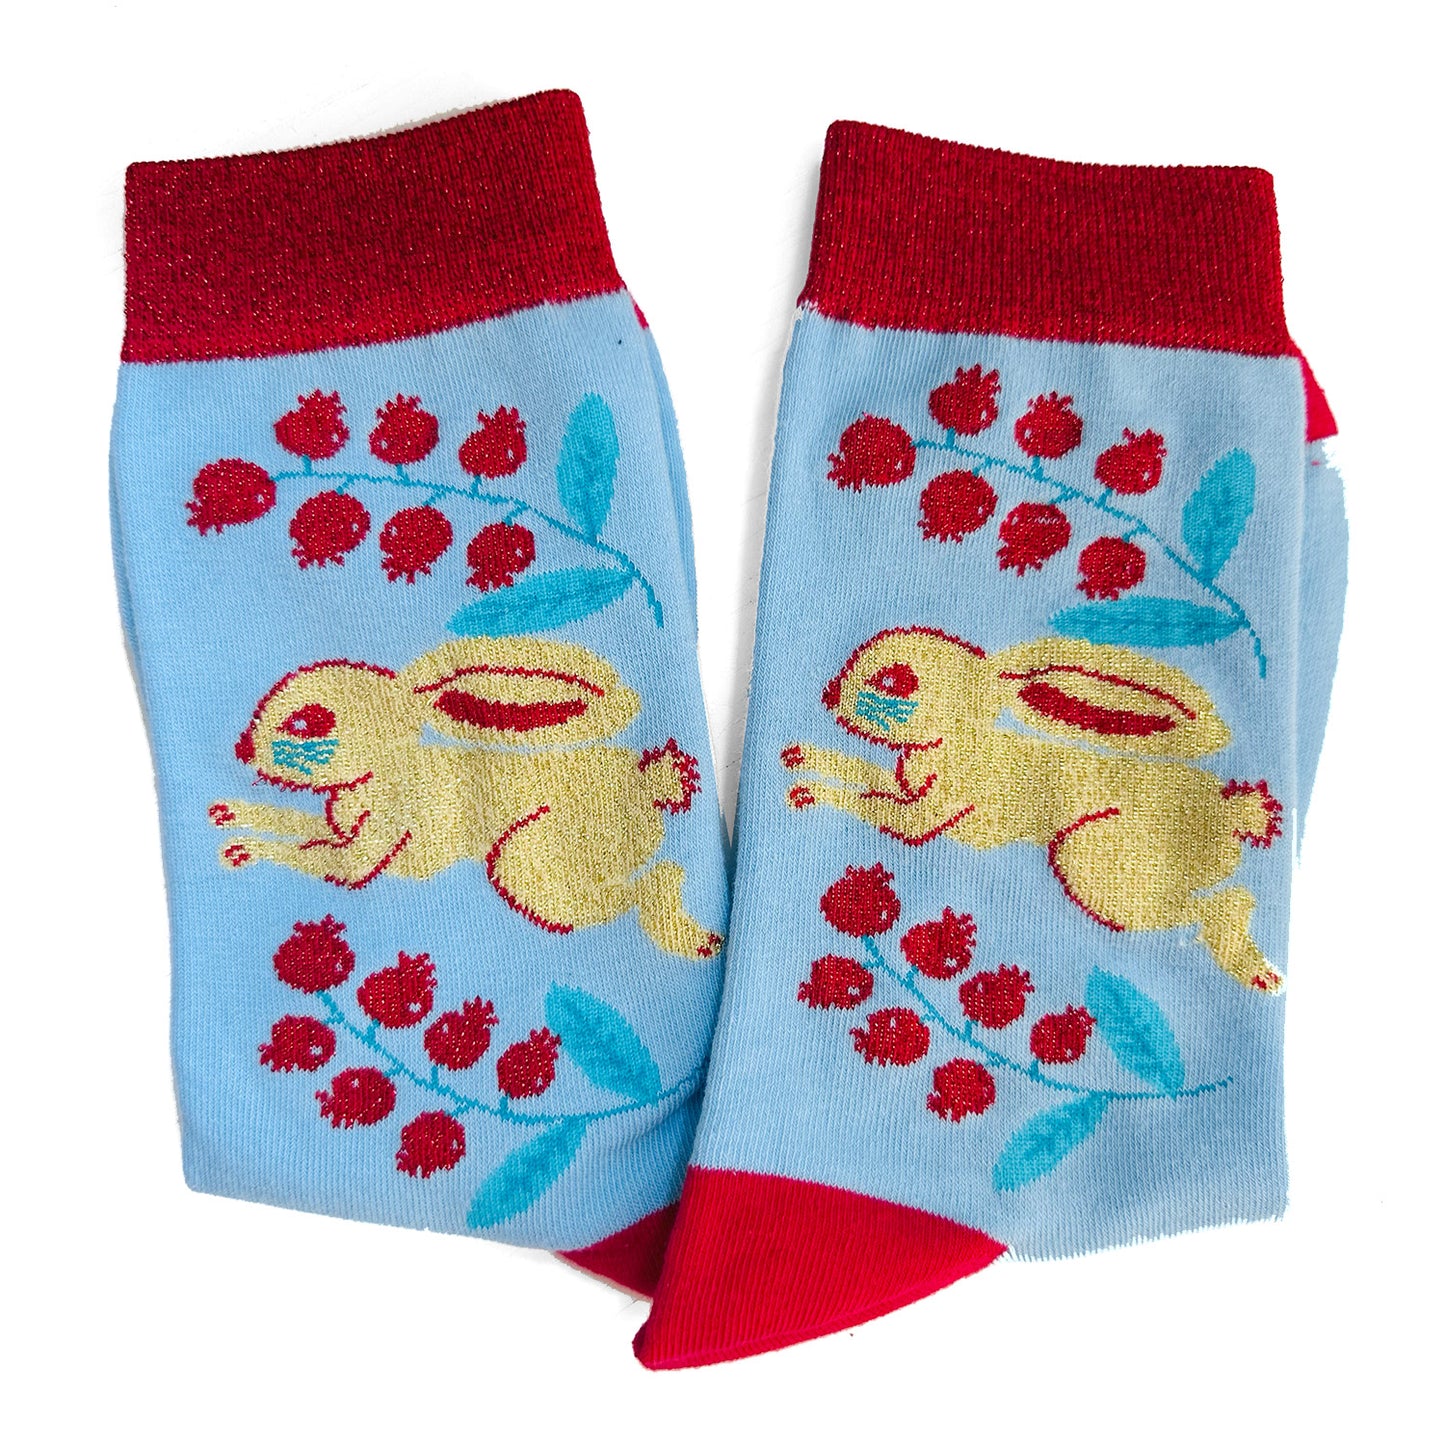 A pair of blue and red socks with rabbits on them.